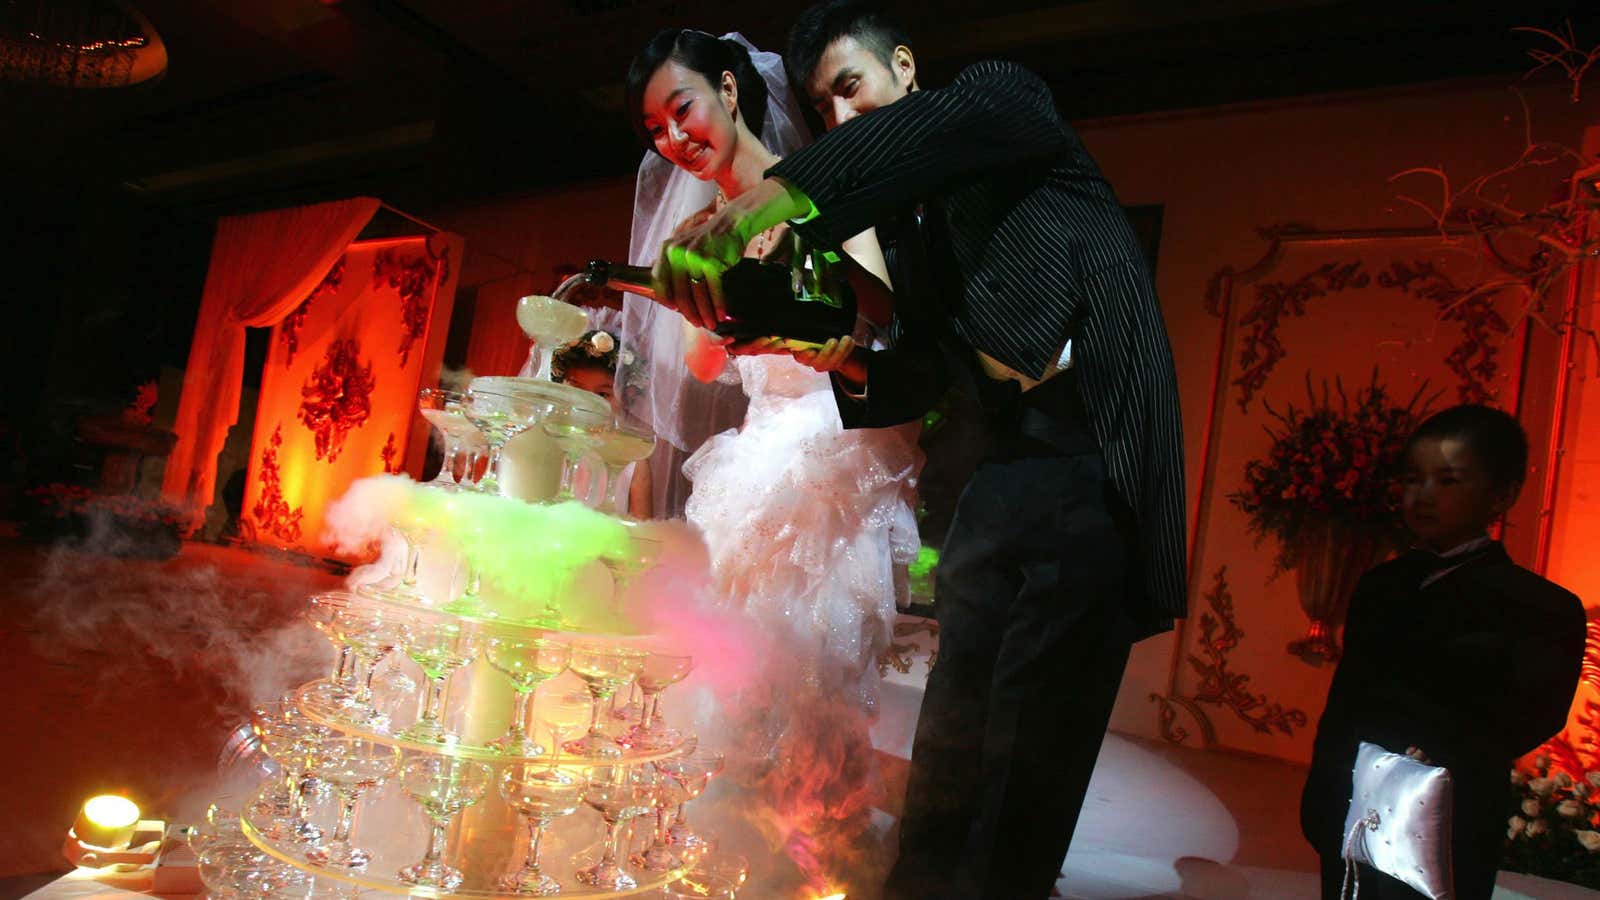 Chinese authorities are turning their noses up at fake Champagne